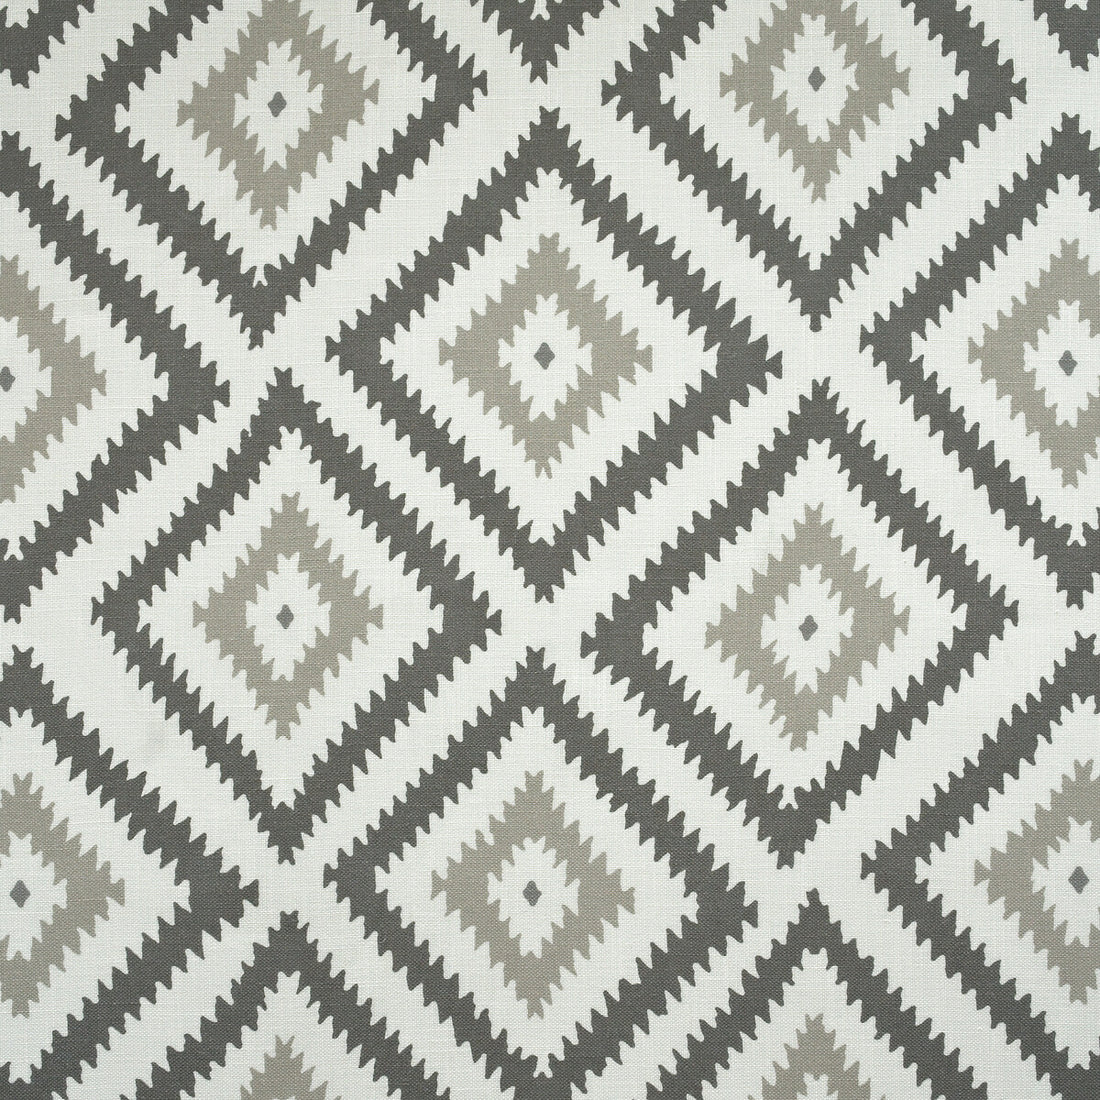 Glacier Outdoor fabric in rock color - pattern AM100348.2111.0 - by Kravet Couture in the Andrew Martin The Great Outdoors collection